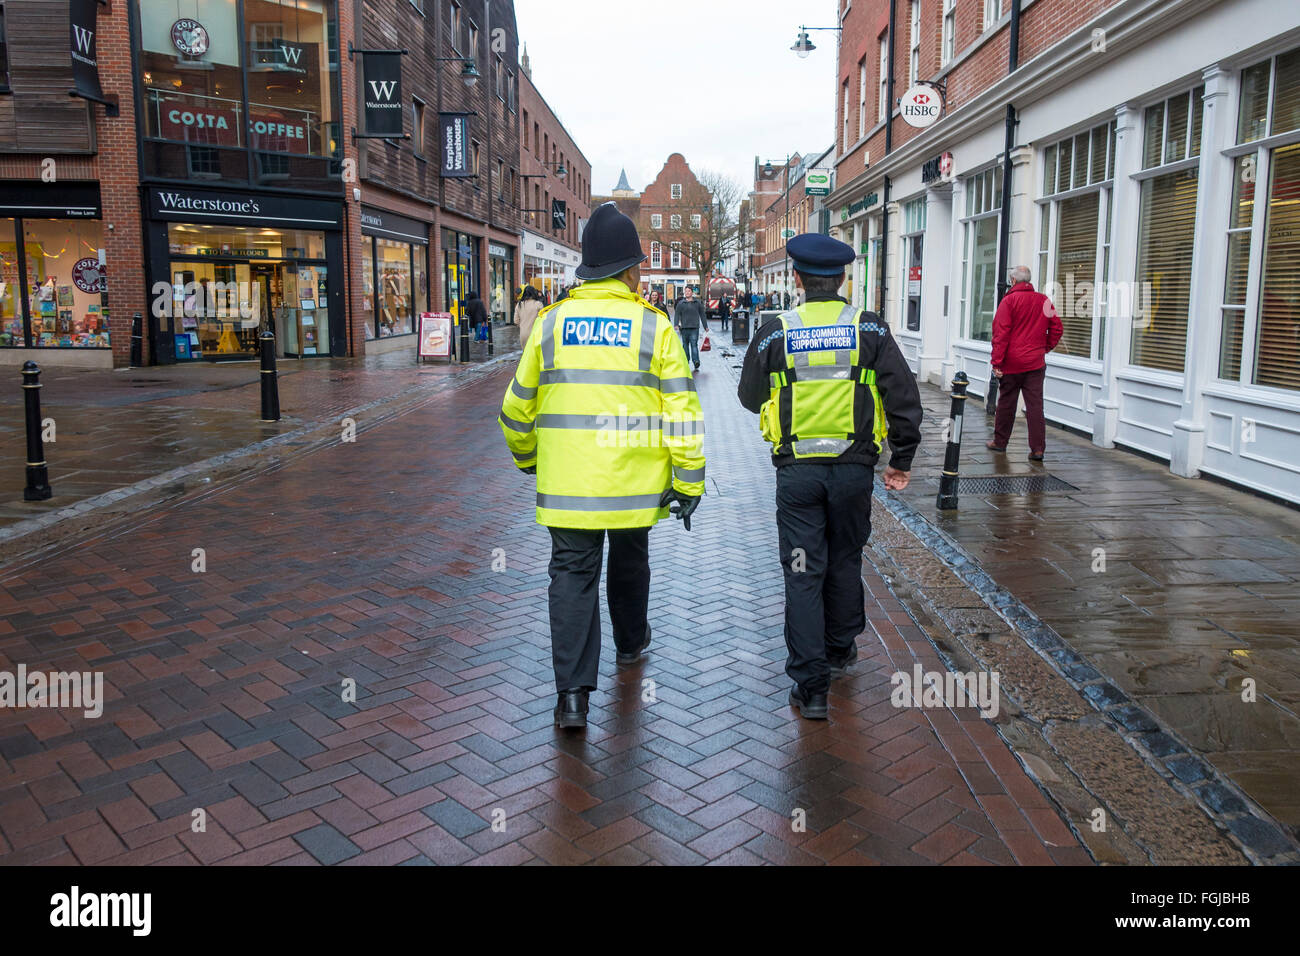 Police Officer and Police Community Support Officer on Foot Patrol Stock Photo